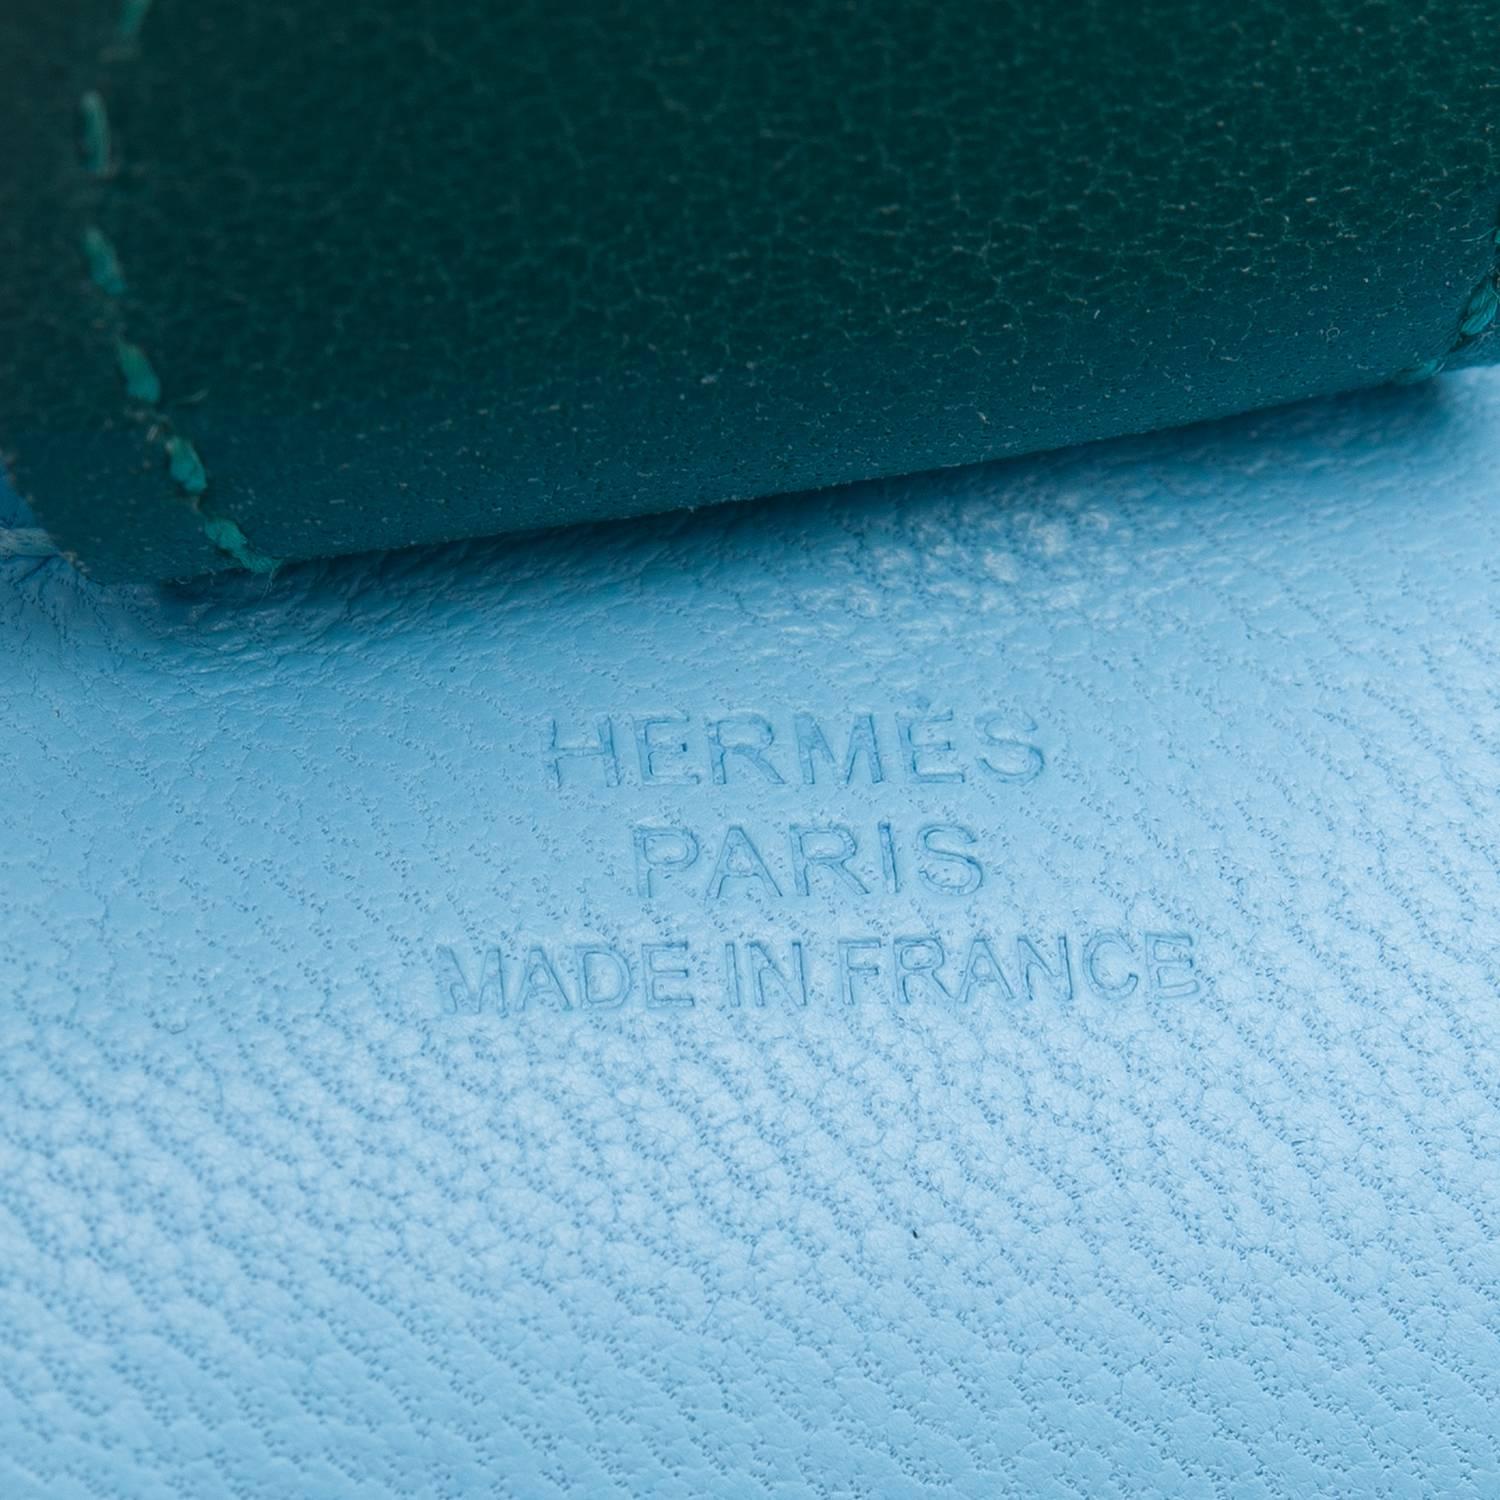 Hermes Grigri Rodeo bag charm in size MM.

This charm is made of Blue Celeste Milo lambskin leather and accented with a Craie mane and tail and a Malachite saddle and holder.

Origin: France

Condition: Never carried

Accompanied by: Hermes box,